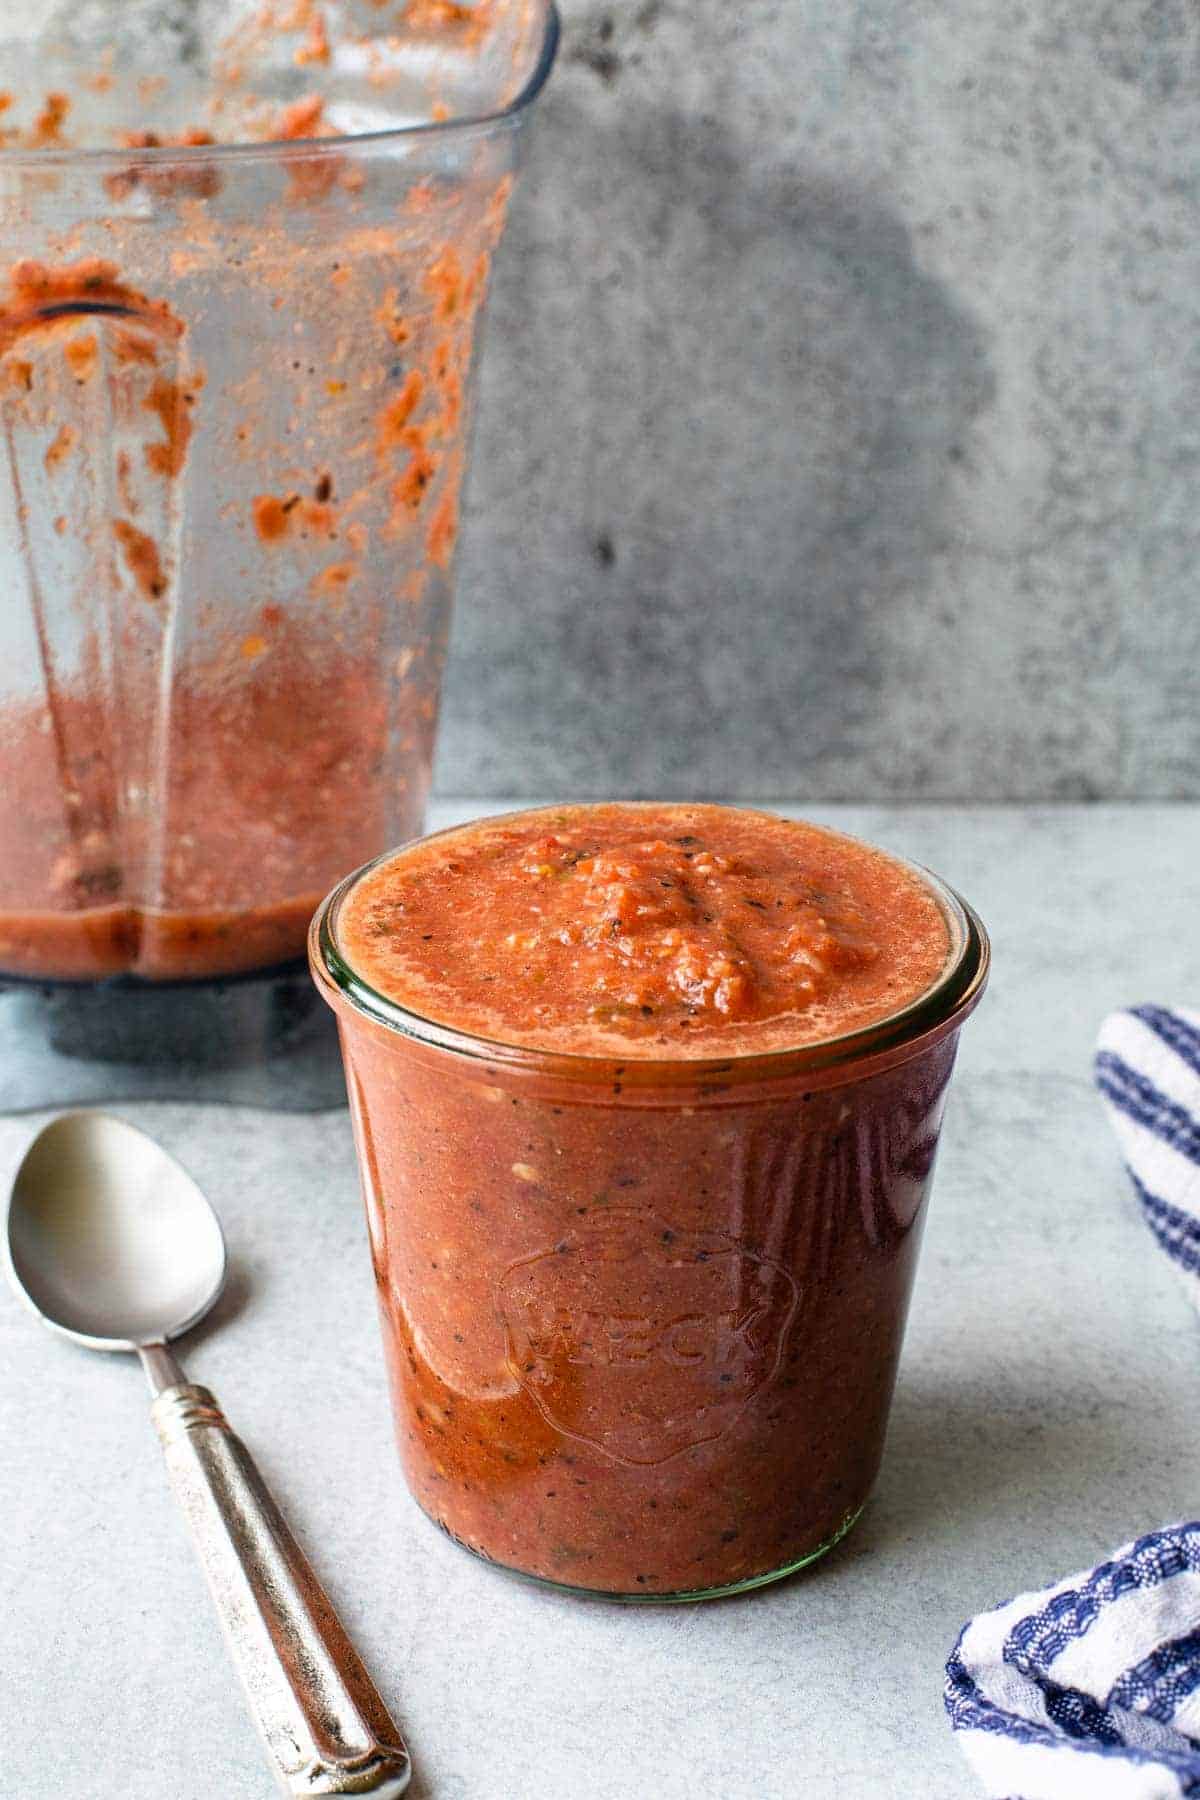 jar of salsa with spoon next to it and blender container in background